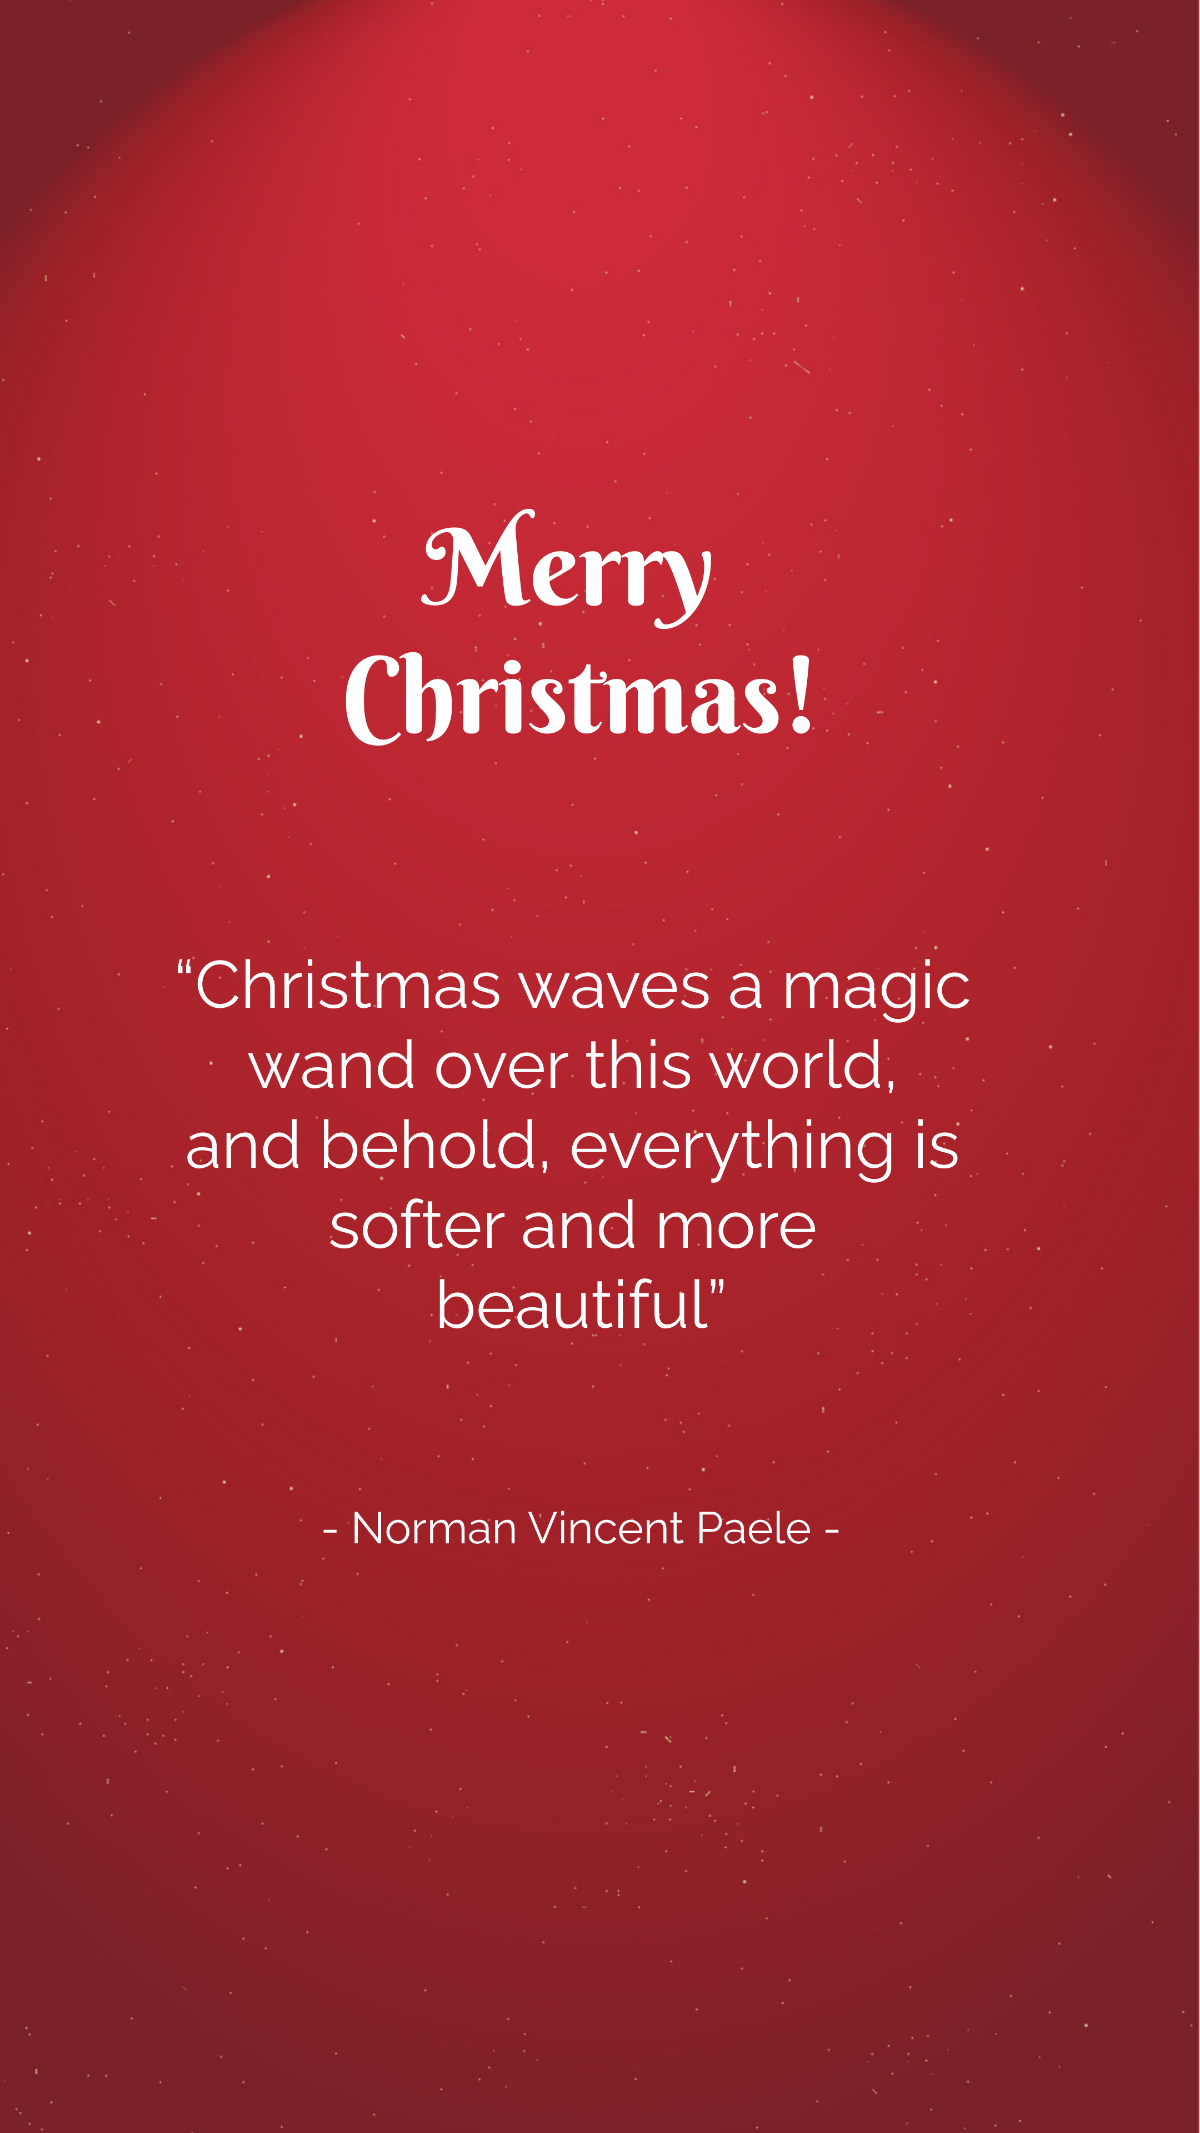 Christmas Eve Celebration Quote Template